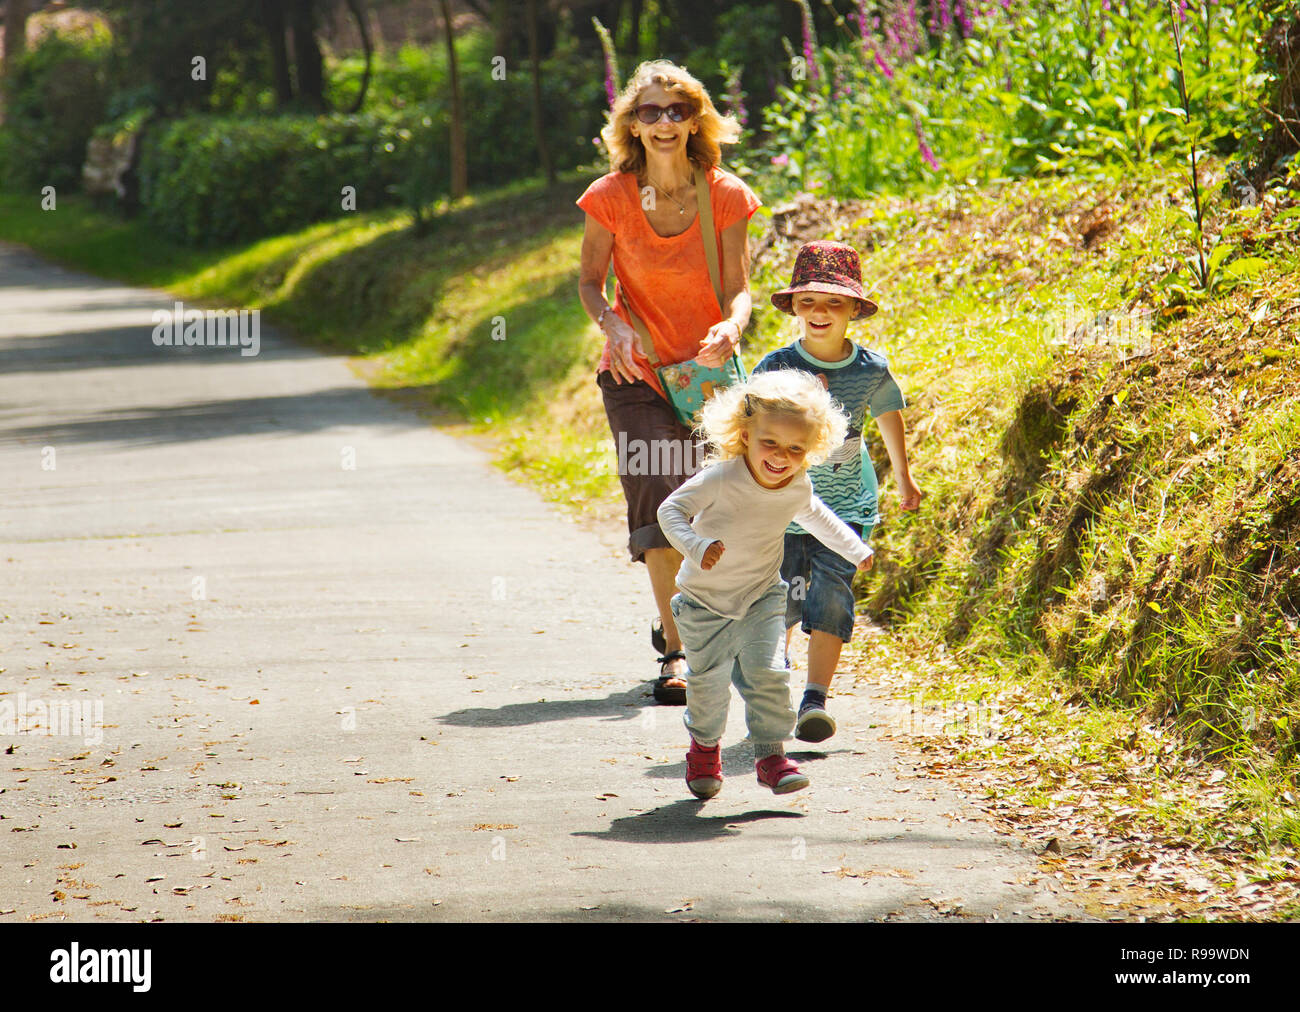 A young looking grandmother playing with her Grandchildren Stock Photo